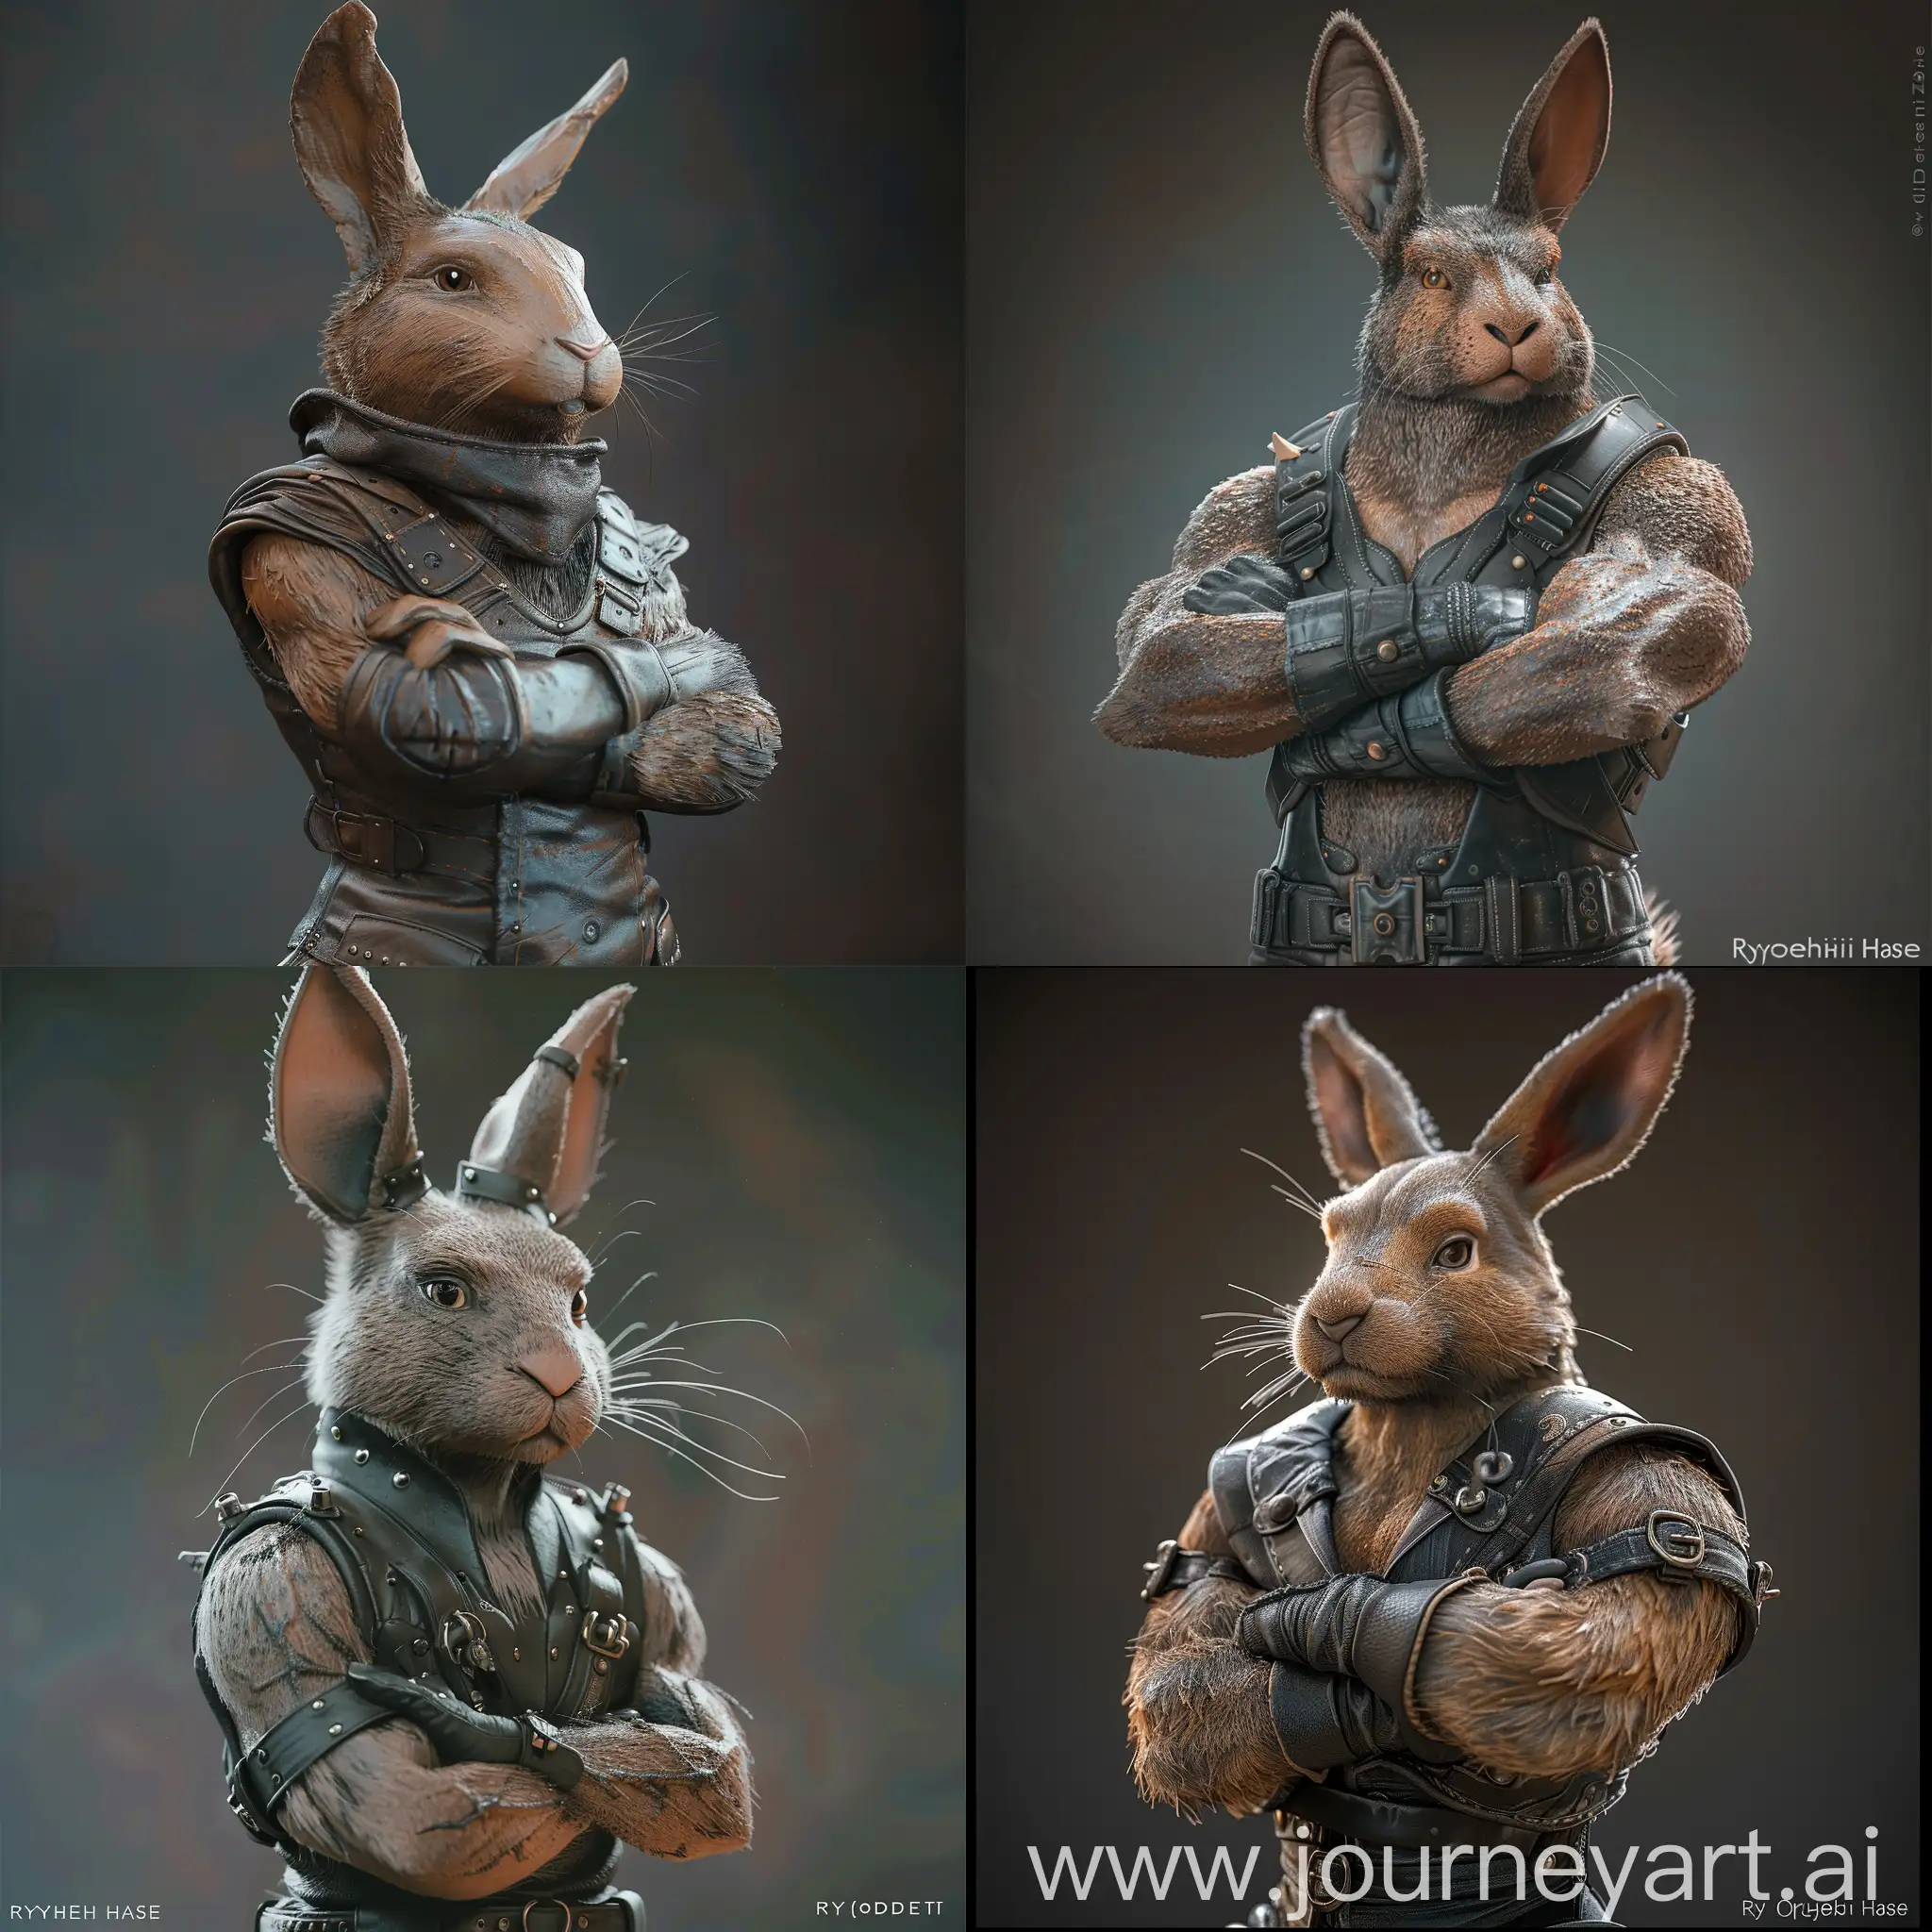 a rabbit dressed in a leather outfit with his arms crossed, a character portrait by Ryohei Hase, trending on zbrush central, furry art, behance hd, daz3d, hyper realism